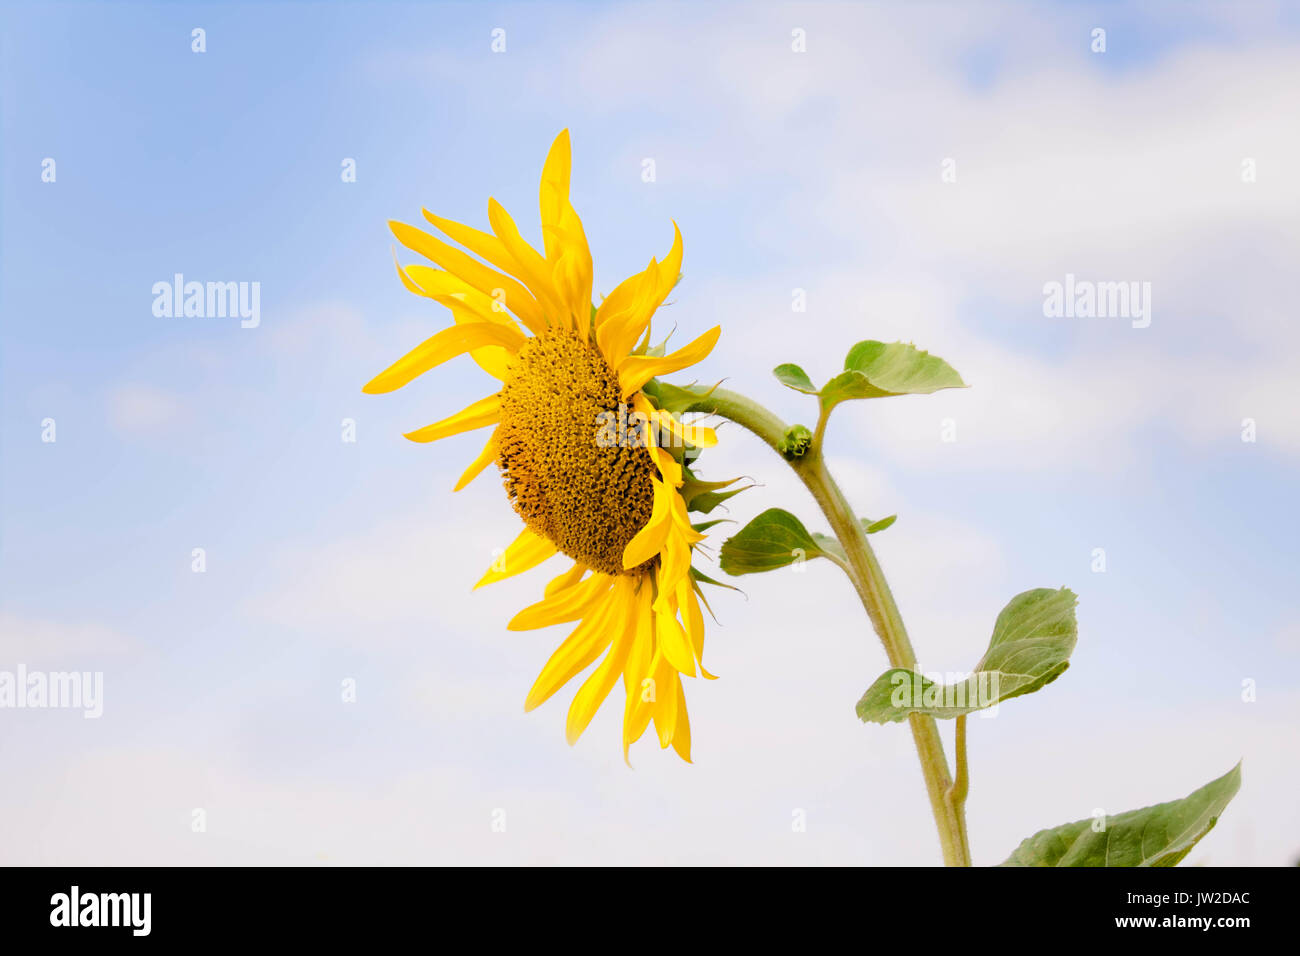 sunflower in summer isolated in blue sky and clouds background Stock Photo